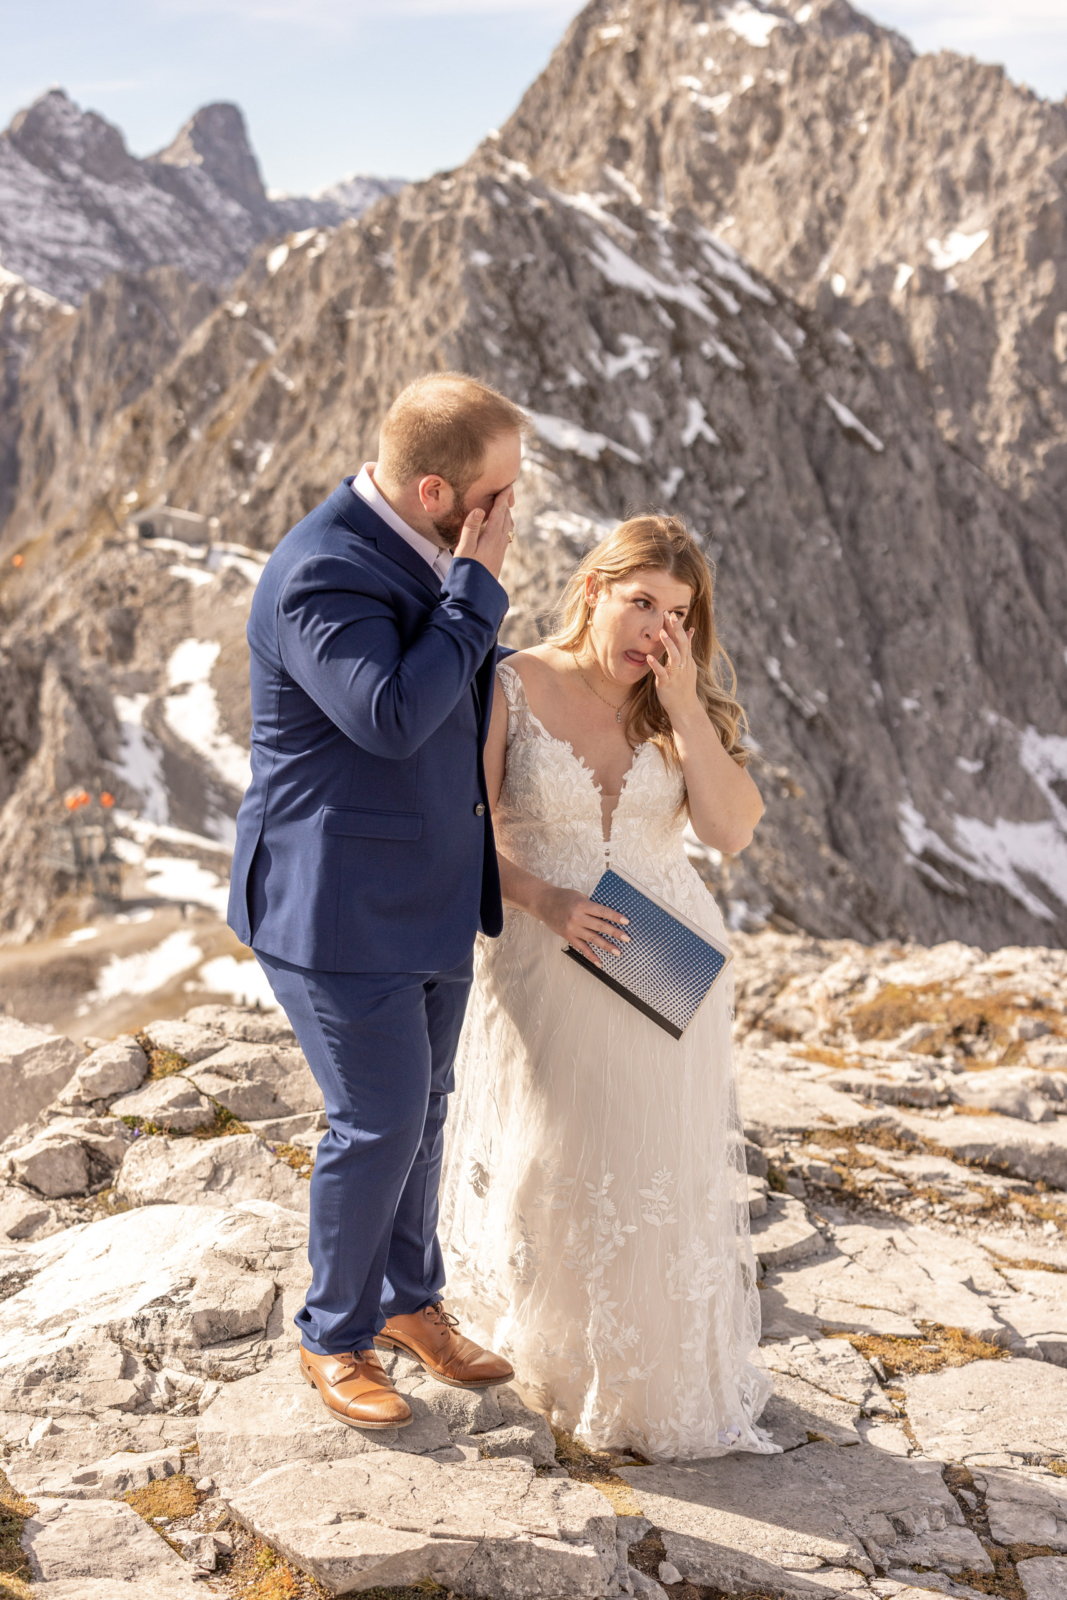 emotional moment during the wedding ceremony in the mountains